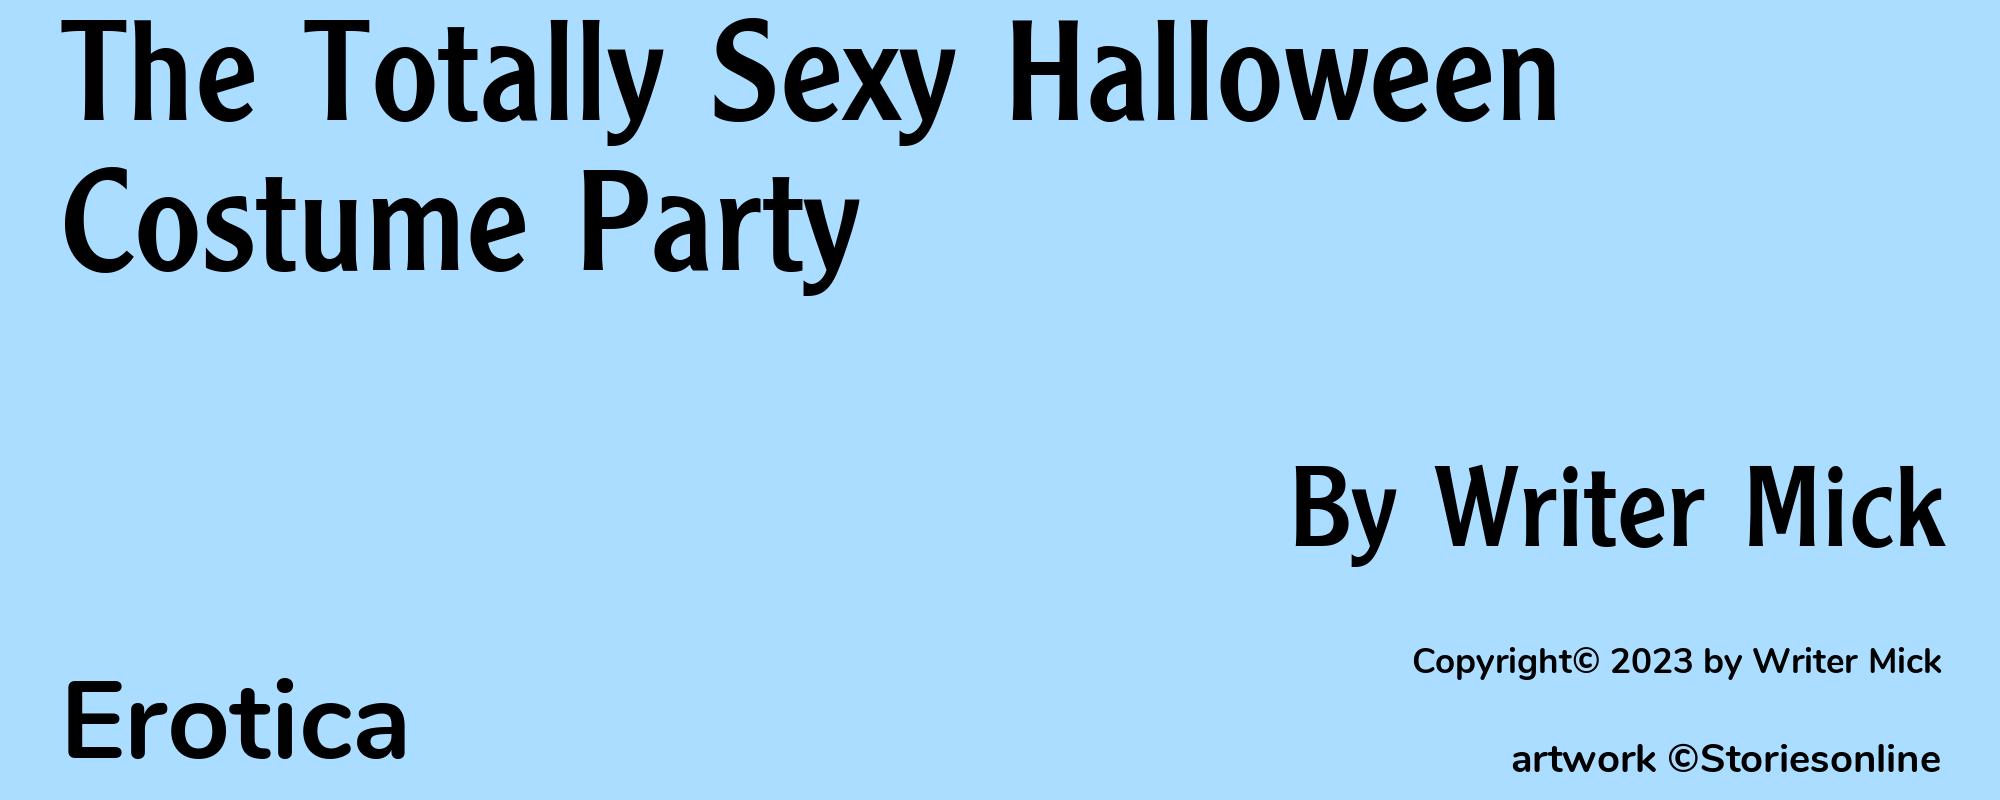 The Totally Sexy Halloween Costume Party - Cover